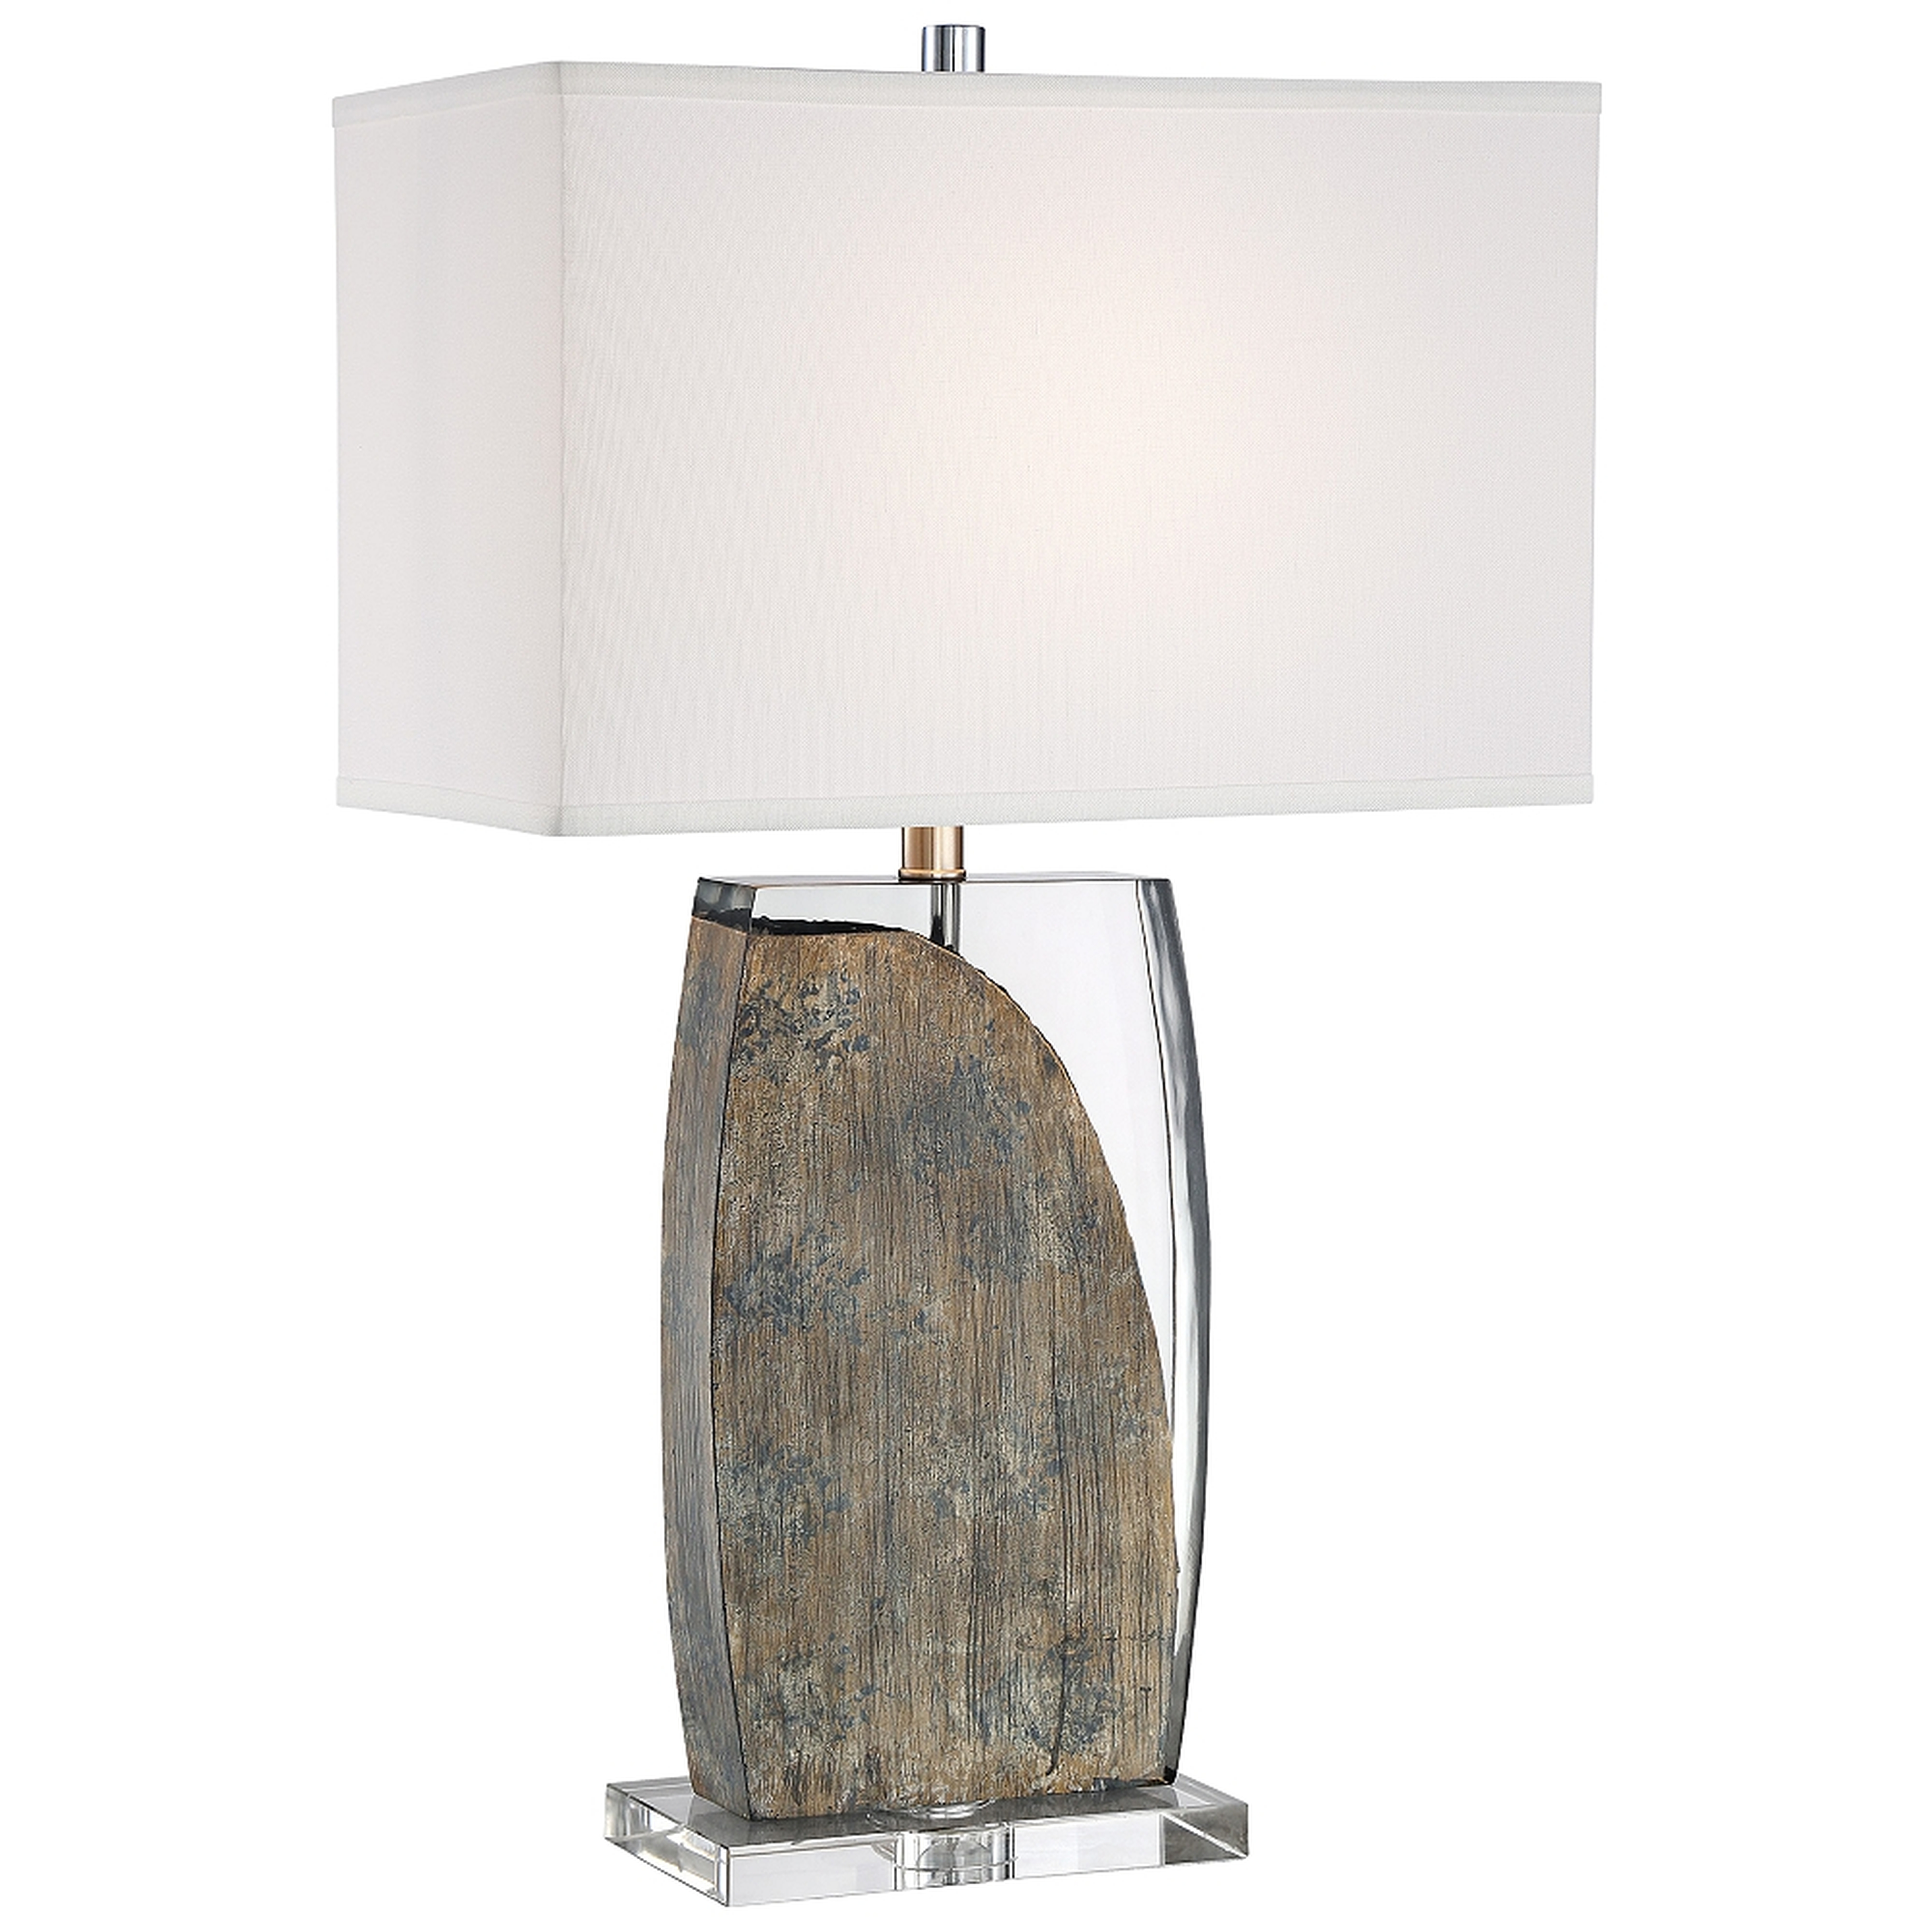 Lite Source Lynch Driftwood and Acrylic Table Lamp - Style # 69R56 - Lamps Plus